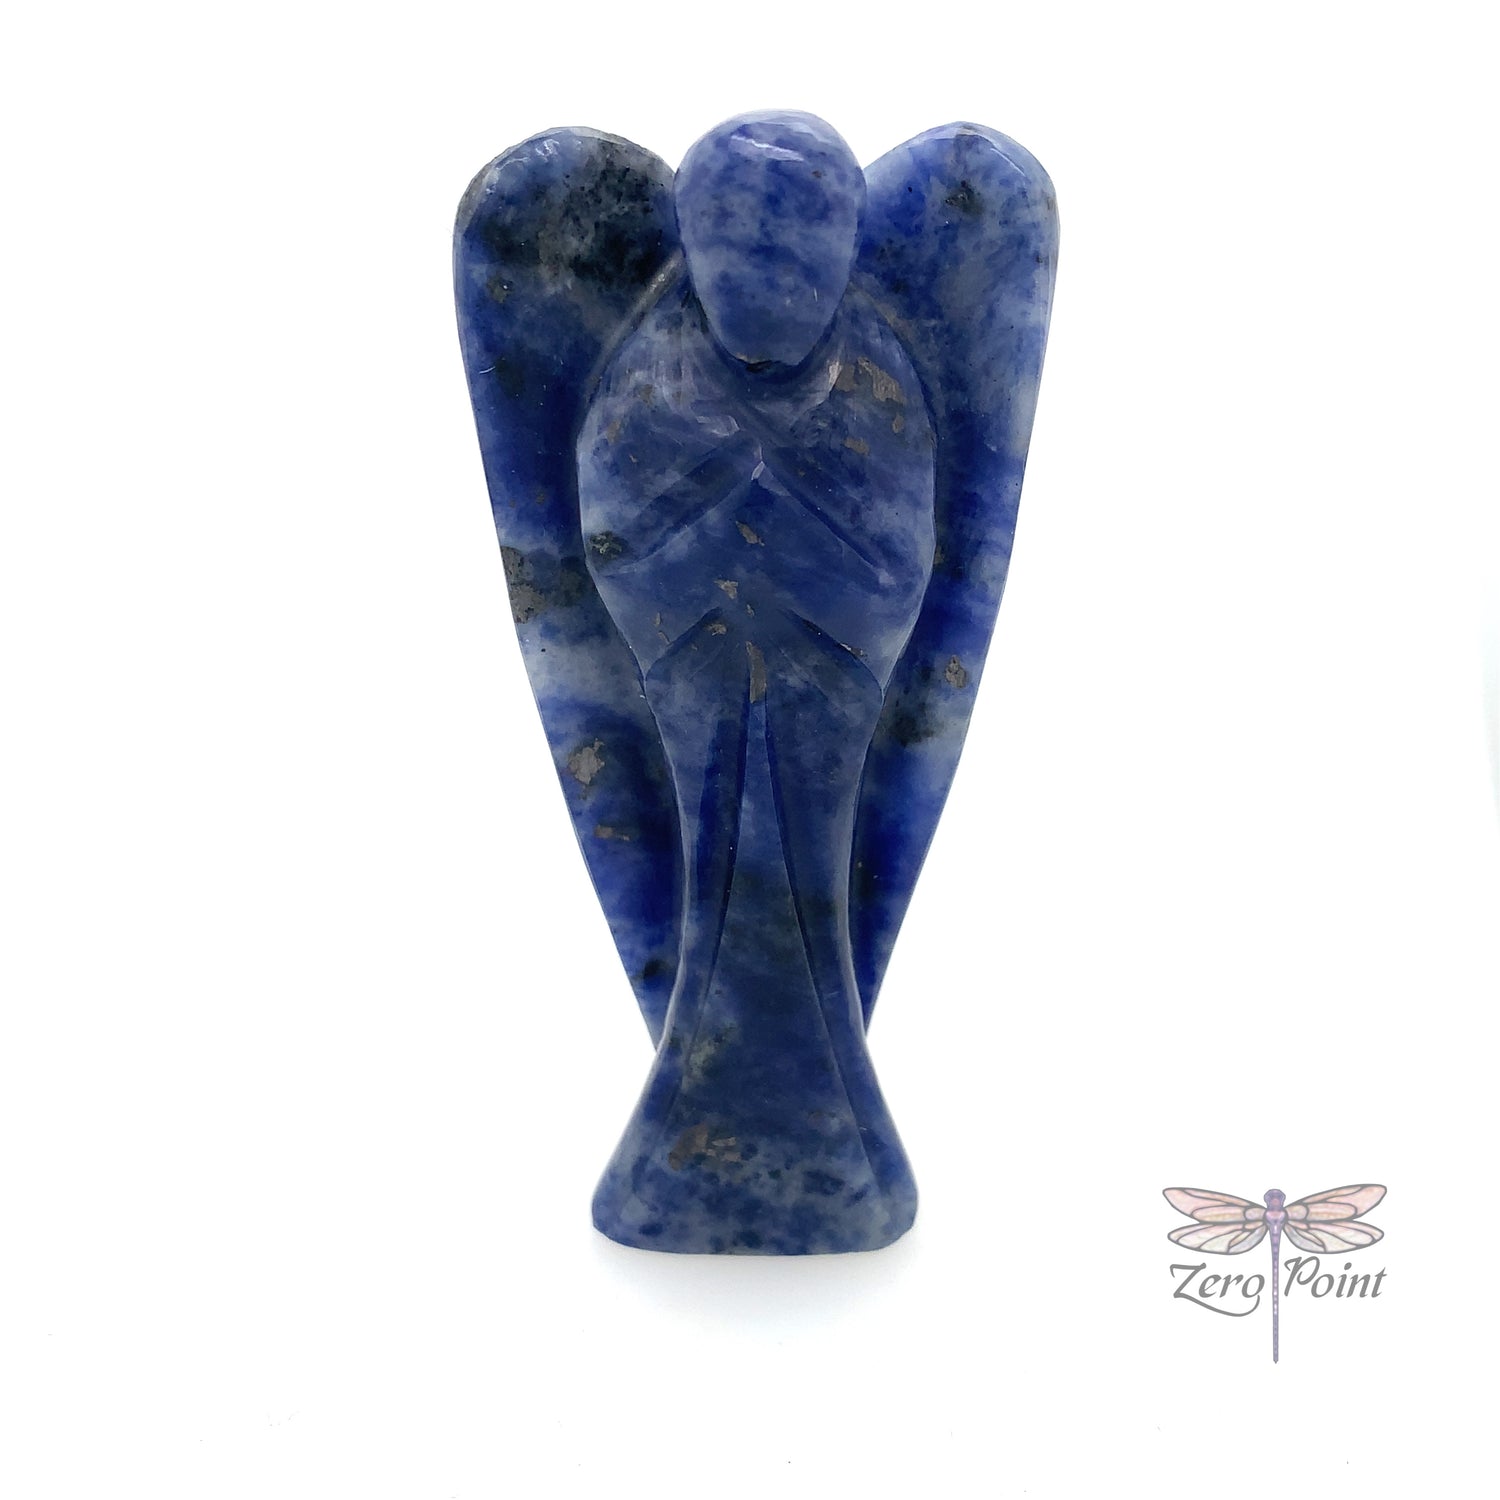 Natural Stone Angel 3" - Zero Point Crystals